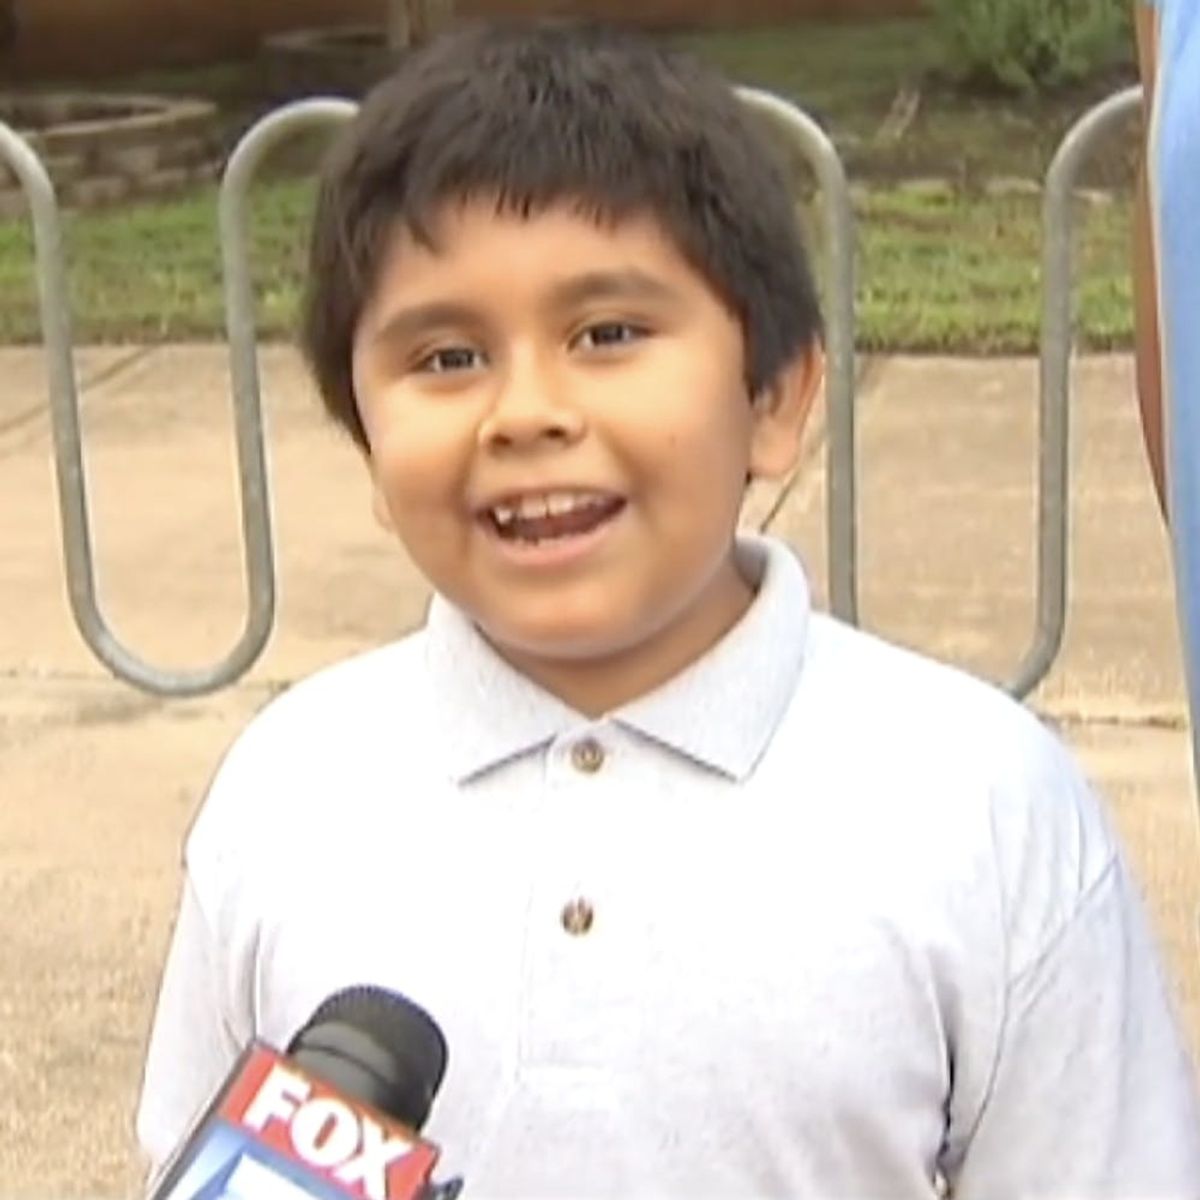 This Little Guy’s Back-to-School Excitement Will Totally Make Your Day